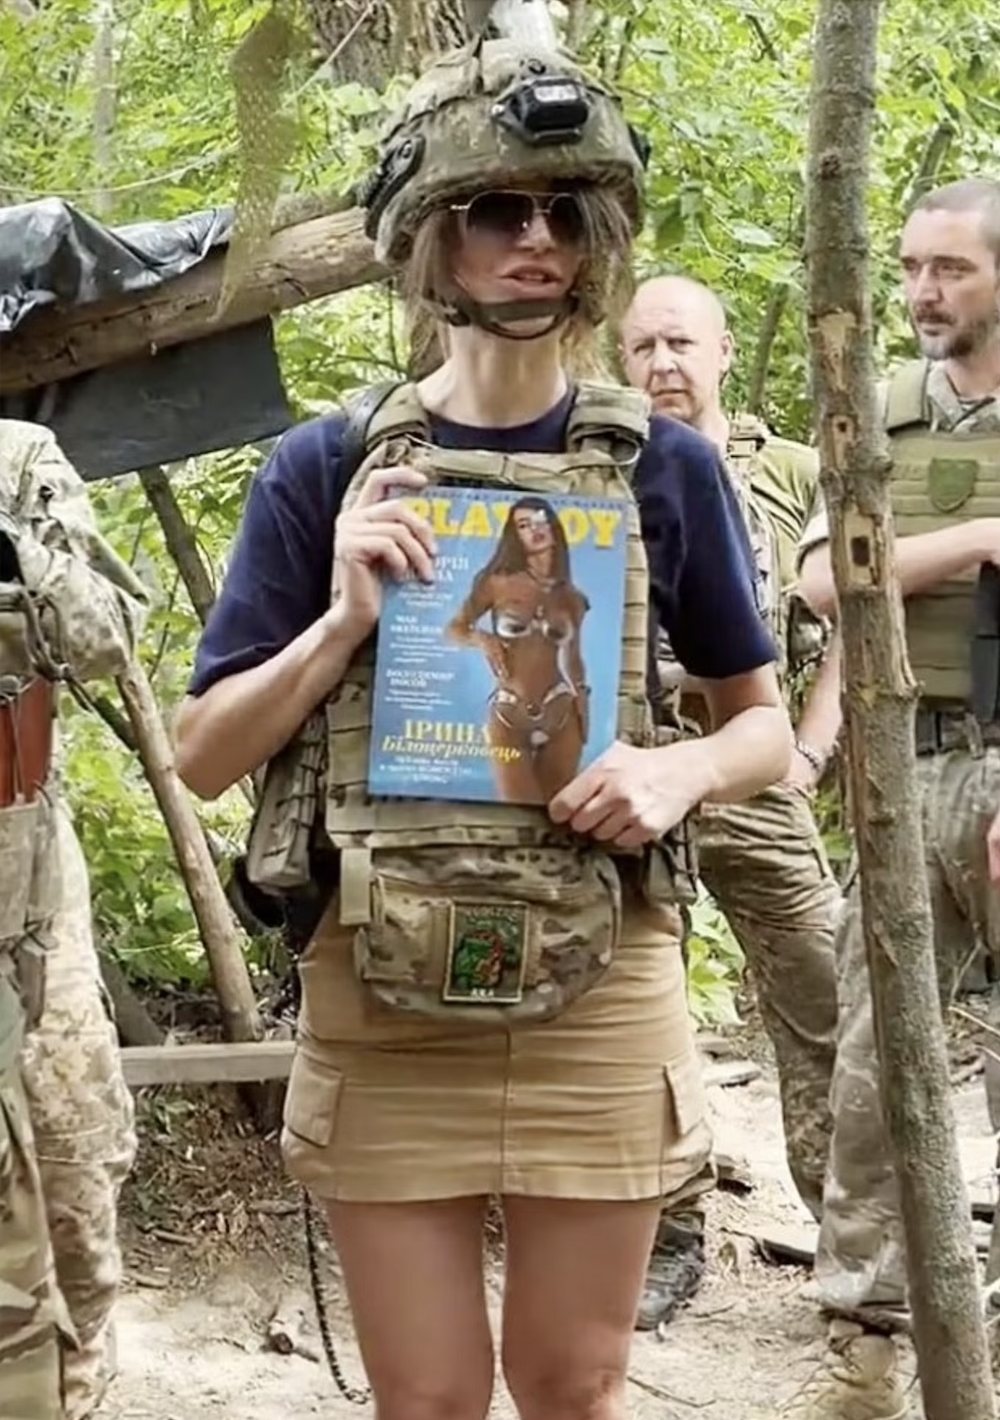 Ukrainian woman who lost her eye in a Russian missile strike is on the cover of Playboy